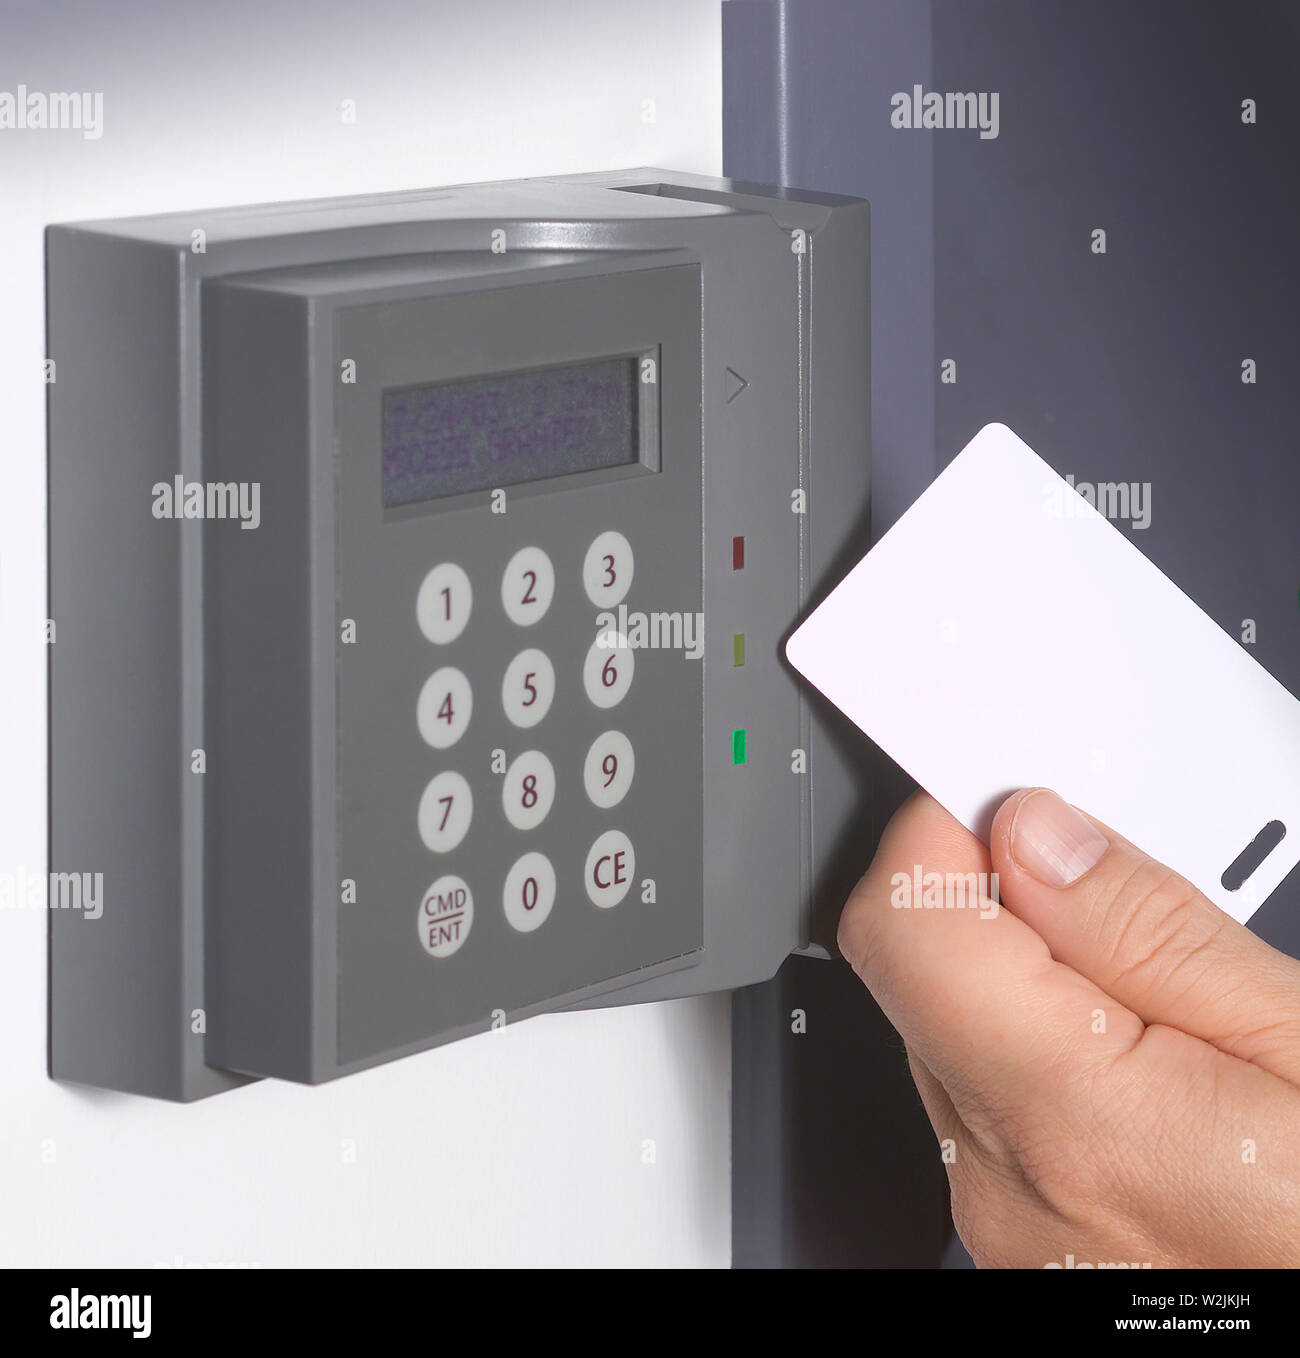 Password code Security keypad or card system protected in Public Building. Stock Photo